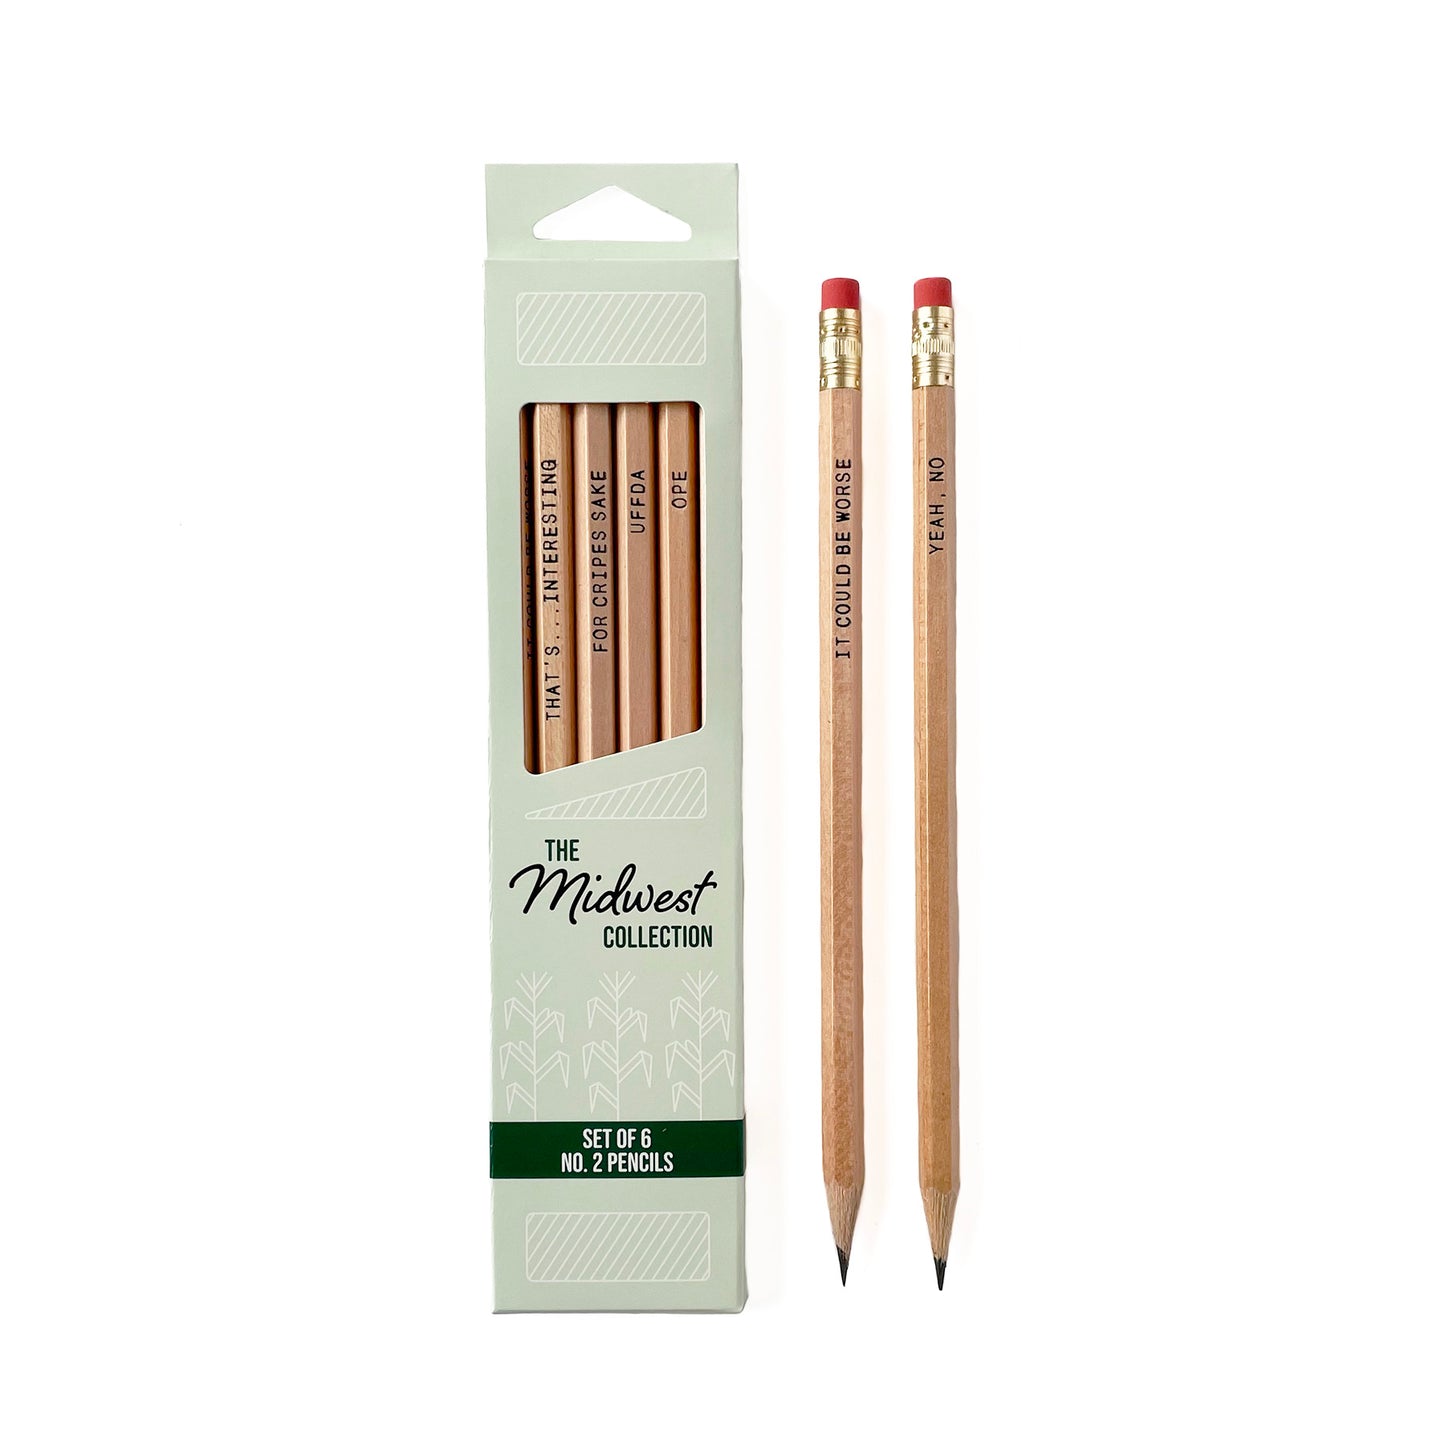 The Midwest Collection Pencil Set